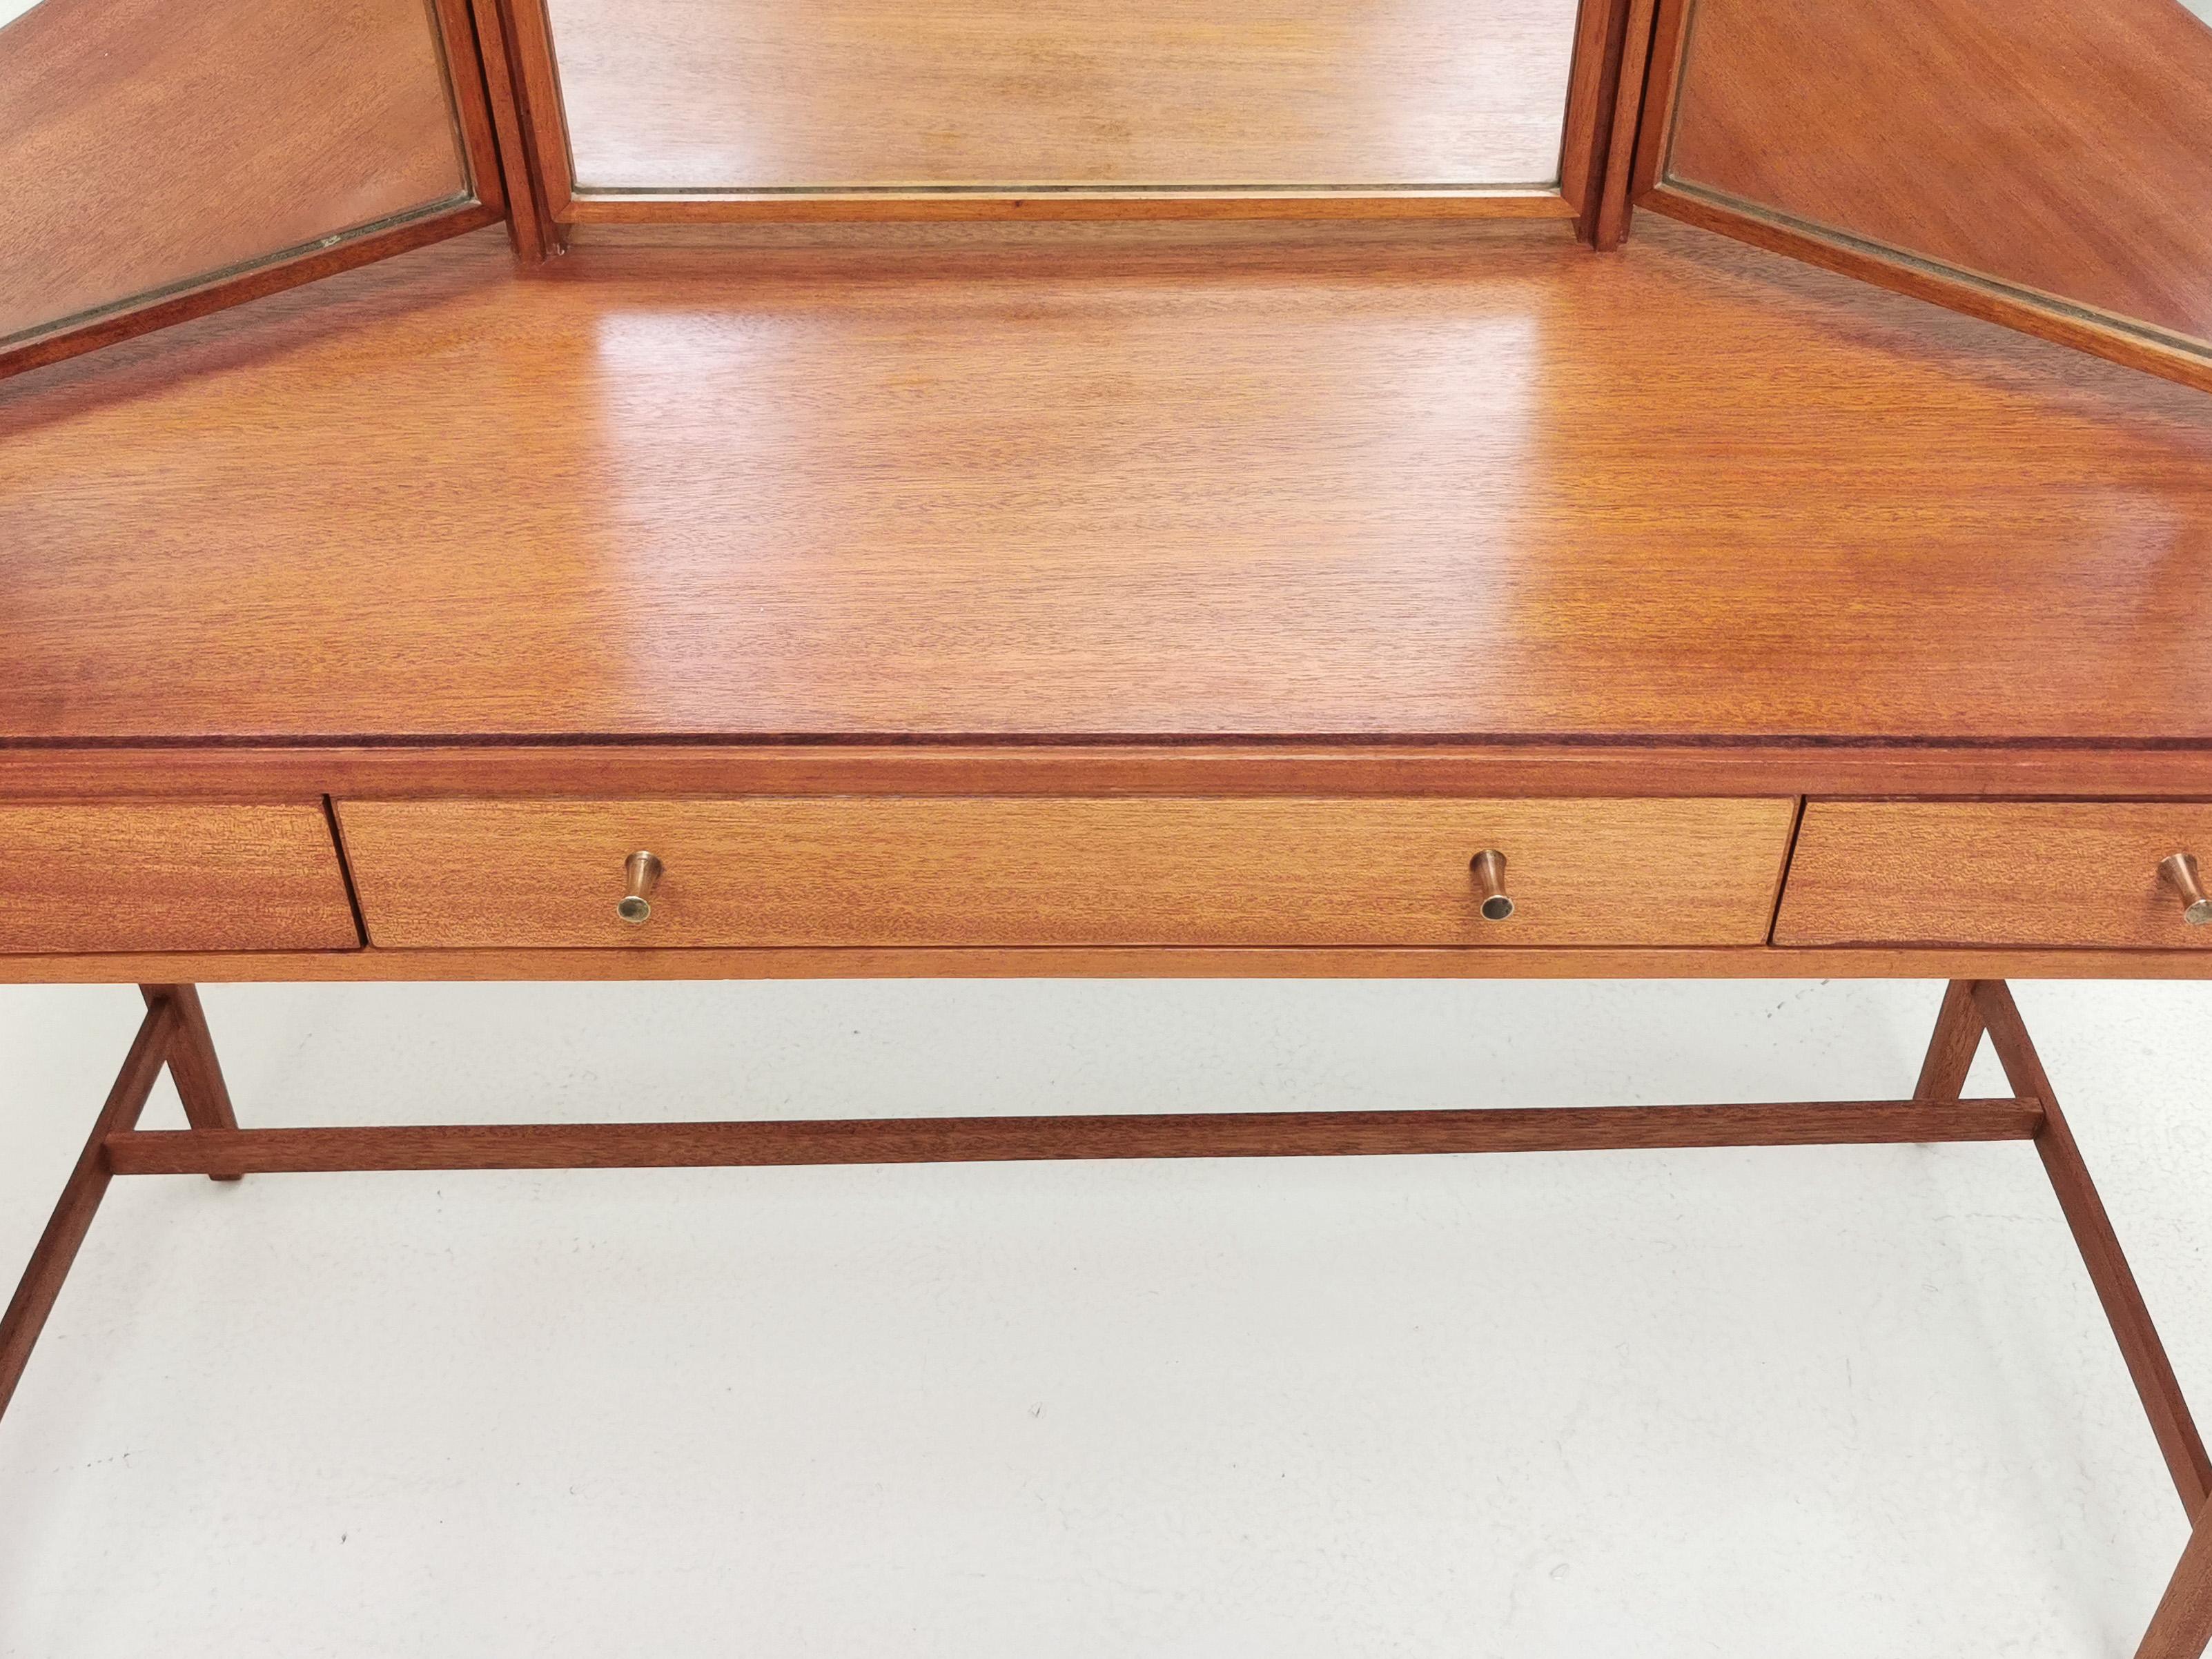 Teak dressing table 

Teak dressing table manufactured by high-quality furniture manufacturer Loughborough and made for Heals London.

Three drawers with trumpet-shaped brass pulls. Drawers are dovetailed, solid and run as precisely as they